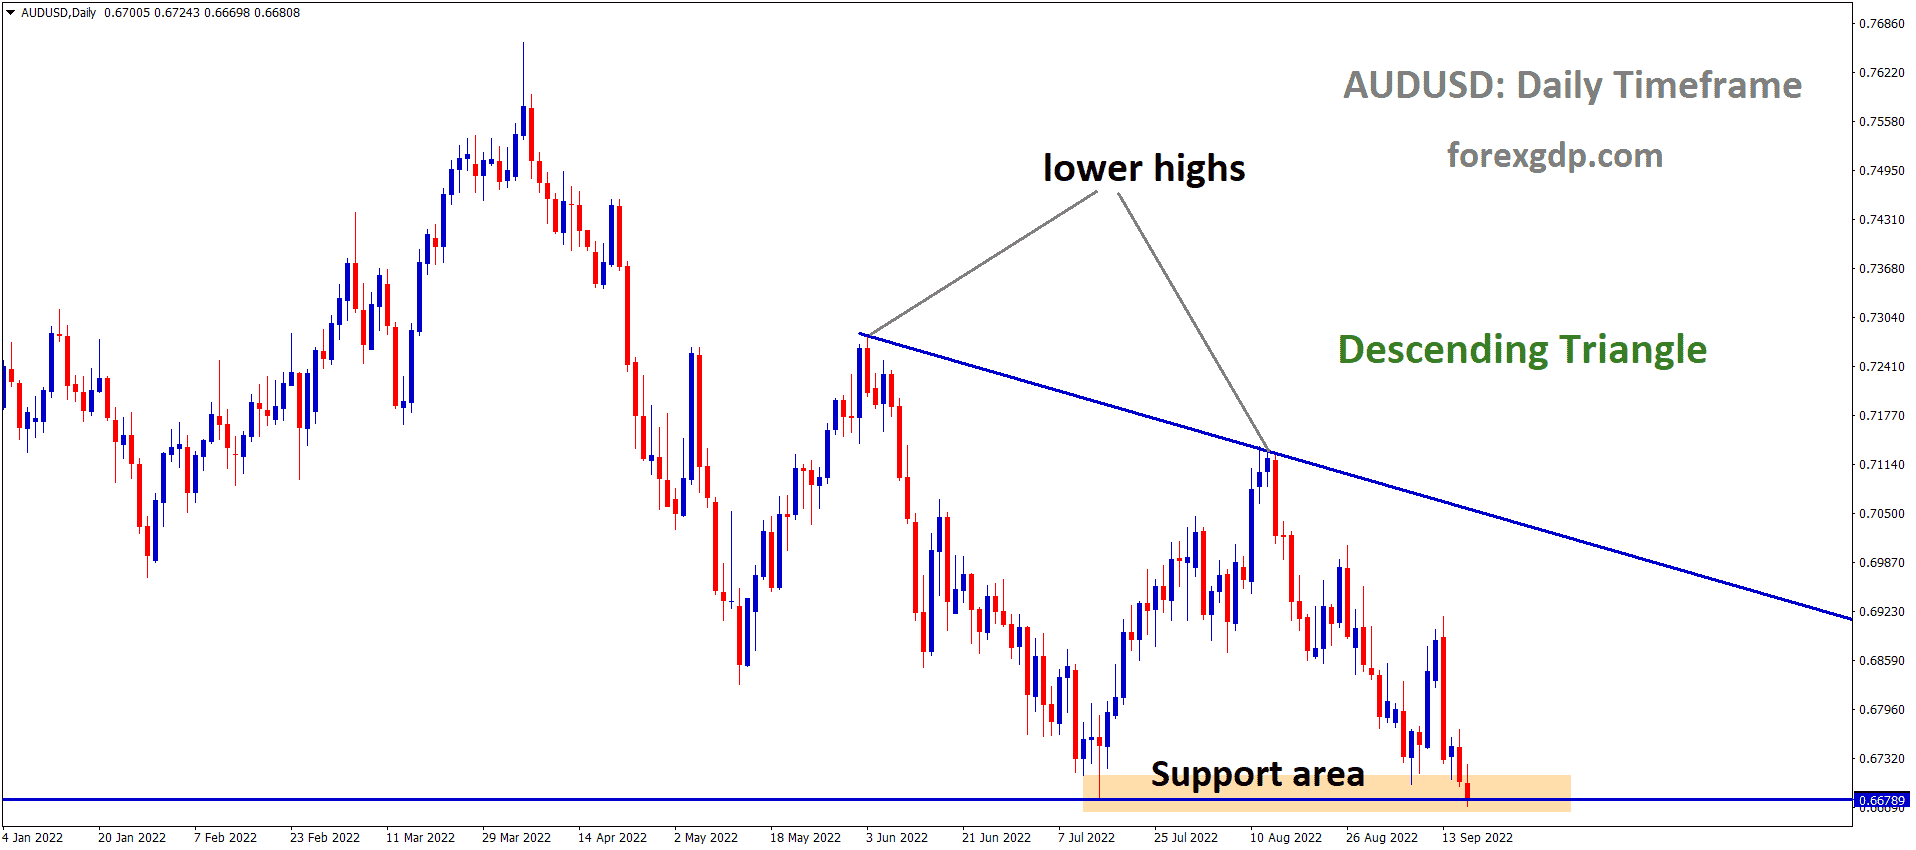 AUDUSD is moving in the Descending triangle pattern and the market has reached the horizontal support area of the pattern 1